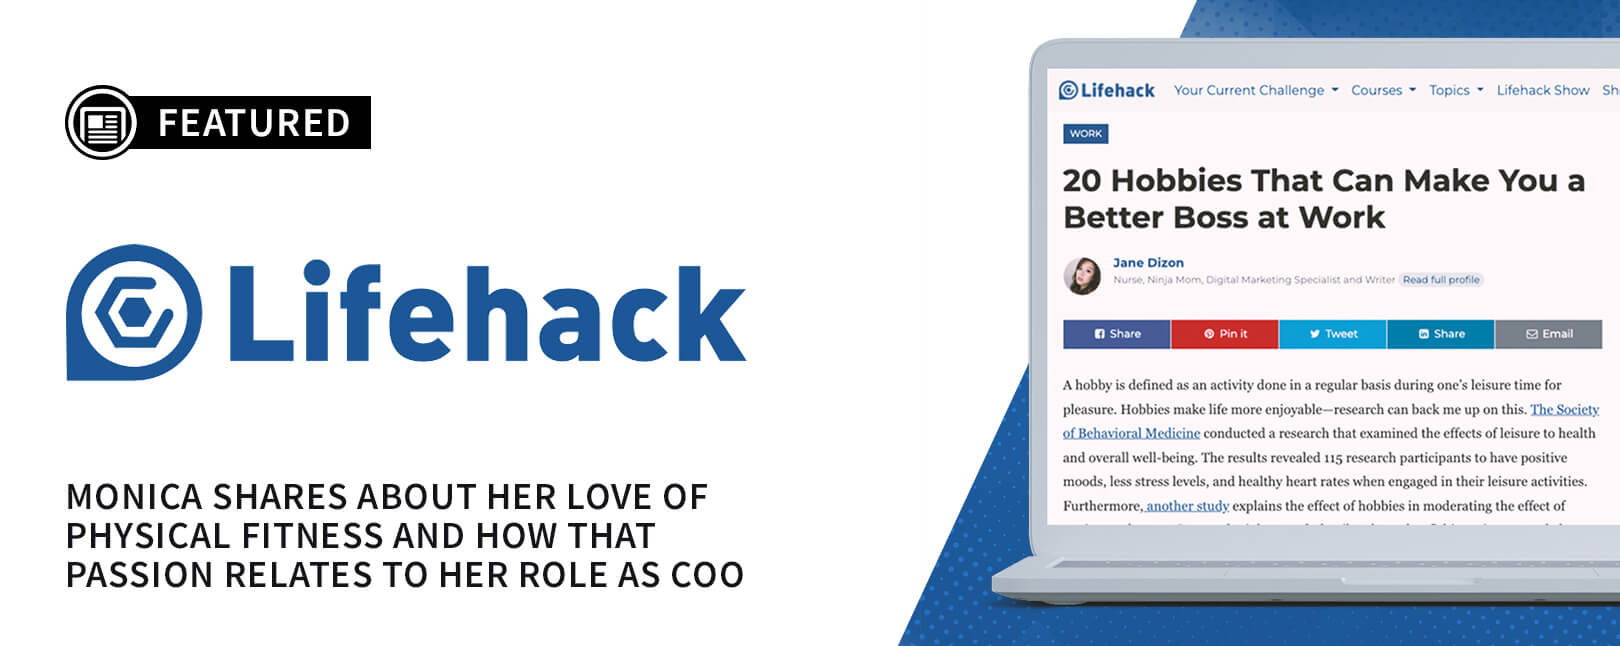 Chargebacks911® Shares Industry Insight With Online Dating Association